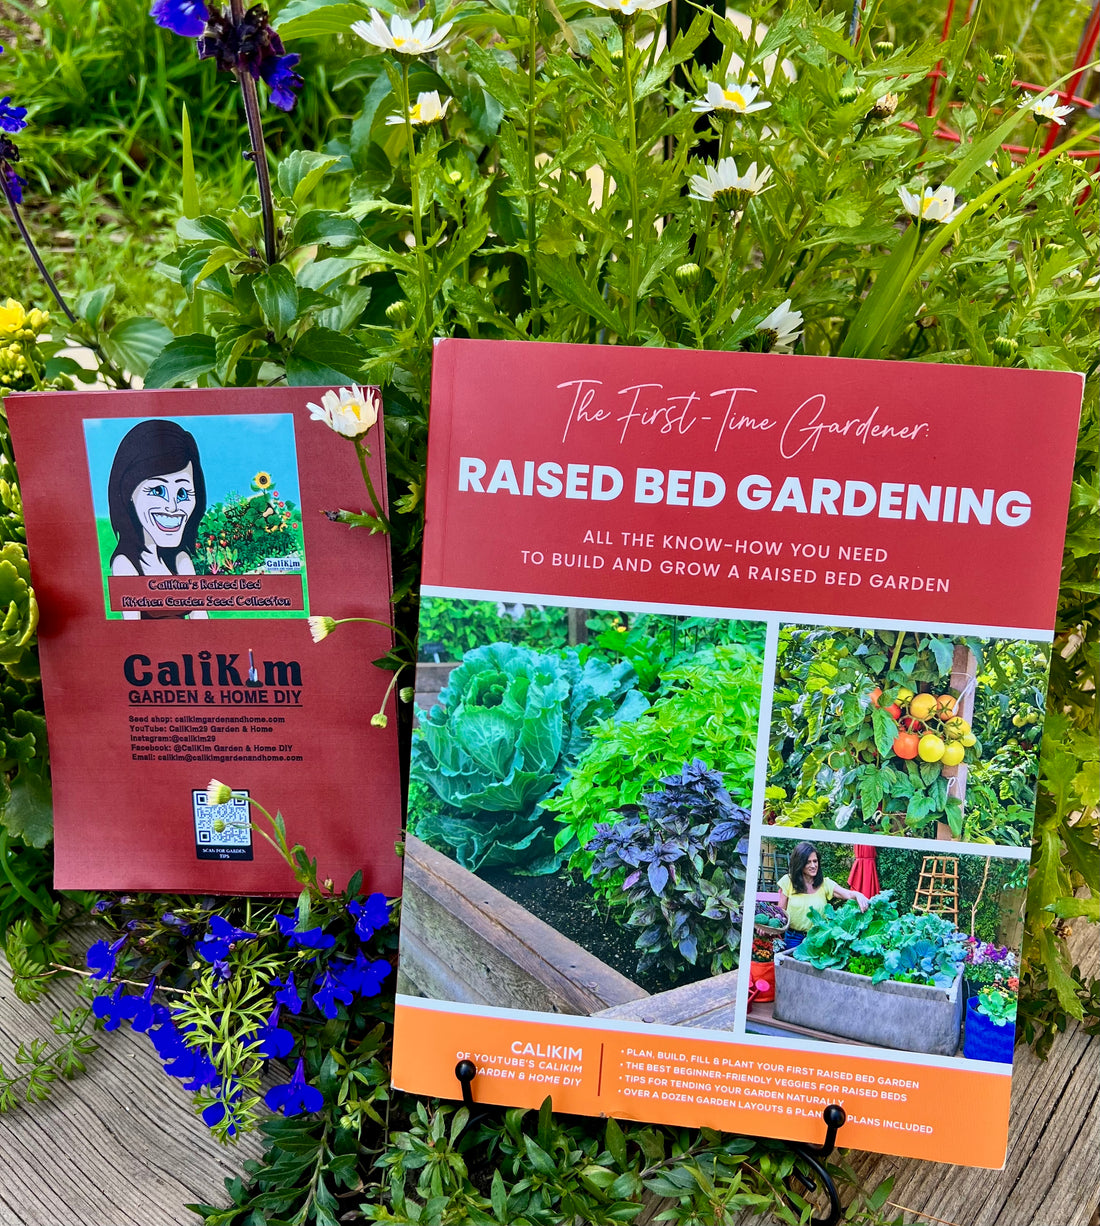 The First Time Gardener:Raised Bed Gardening  - Signed &amp; Personalized with Raised Bed Kitchen Garden Seed Collection